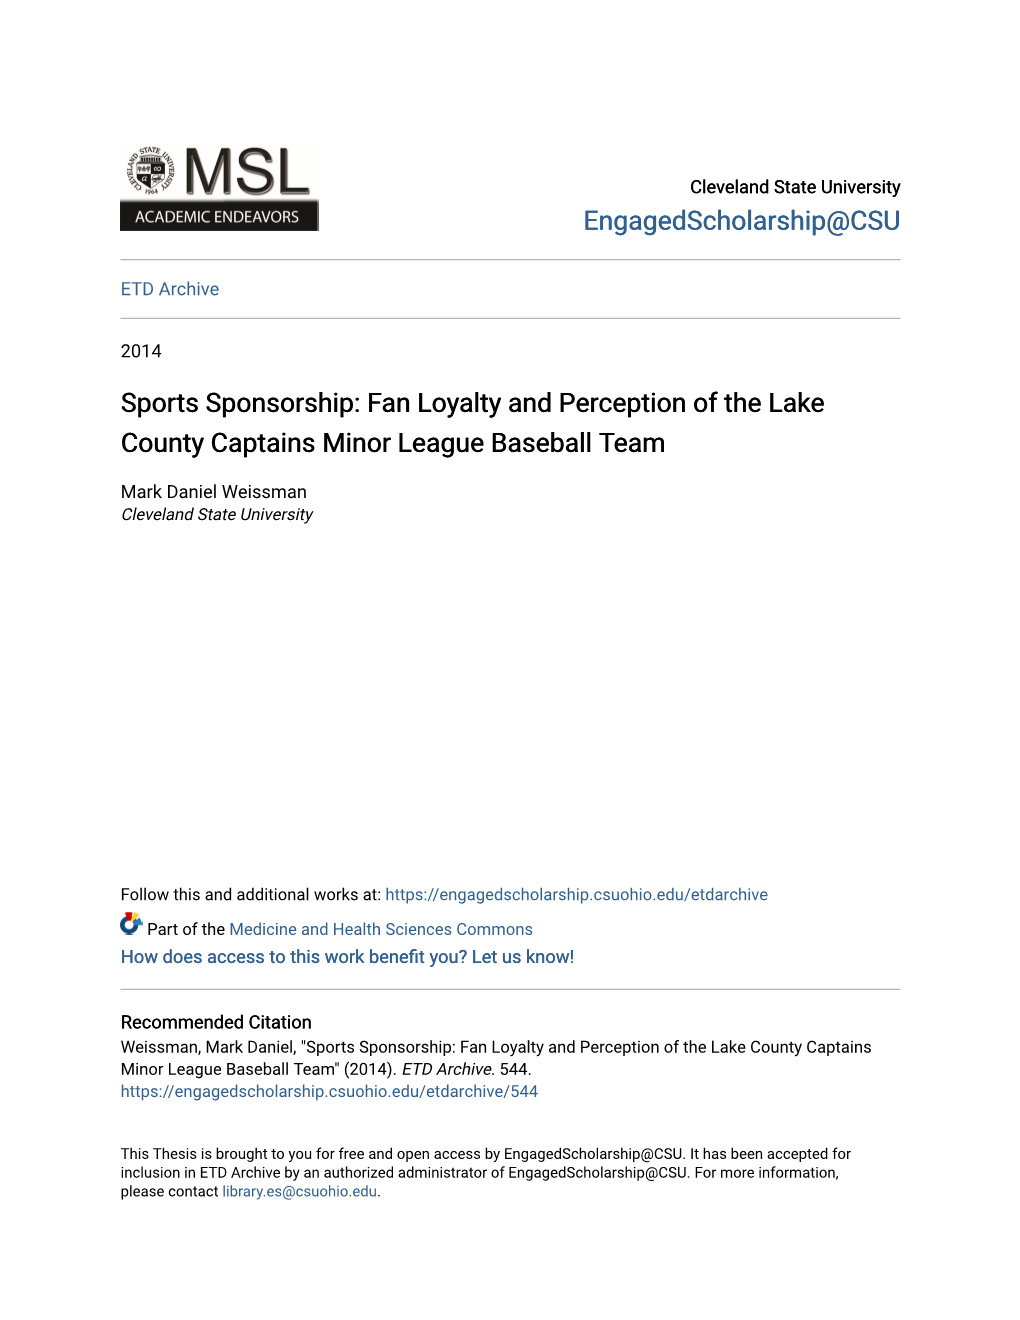 Fan Loyalty and Perception of the Lake County Captains Minor League Baseball Team